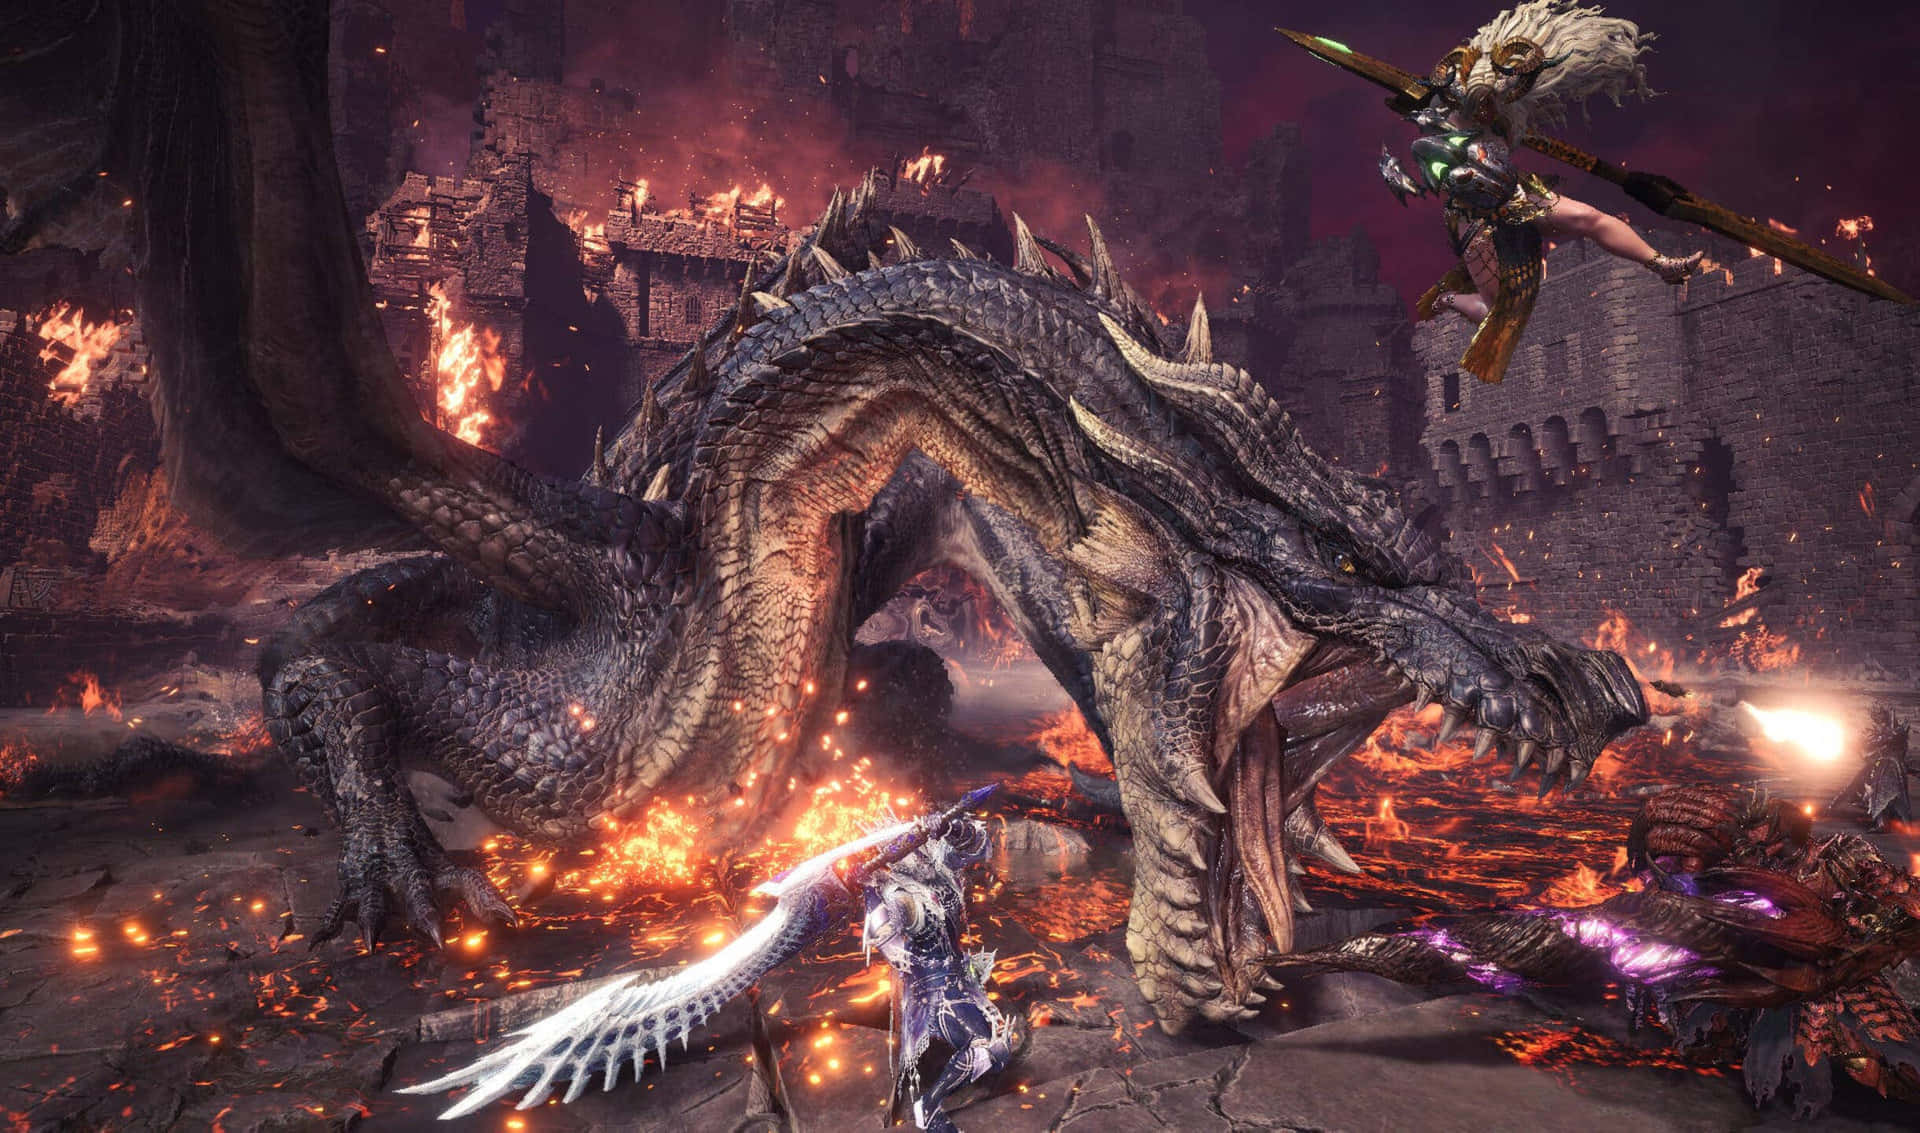 Hunt Exciting Monsters with Friends in Monster Hunter World